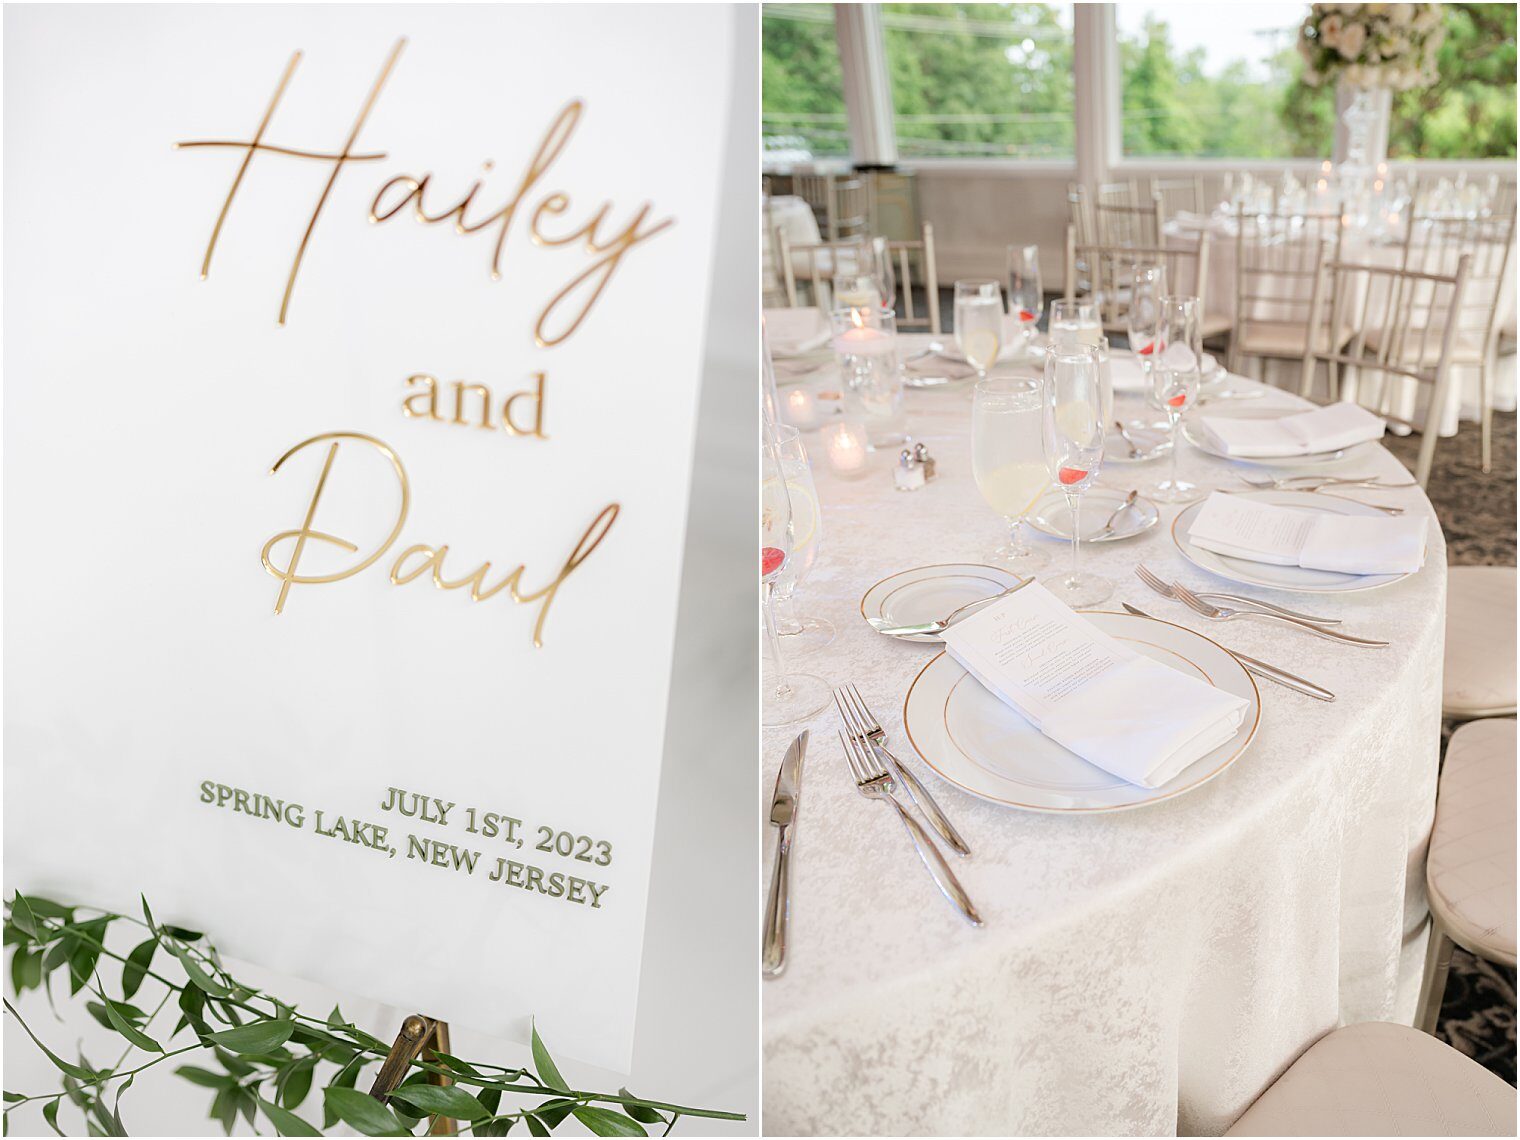 Reception details for the wedding at The Mill Lakeside Manor